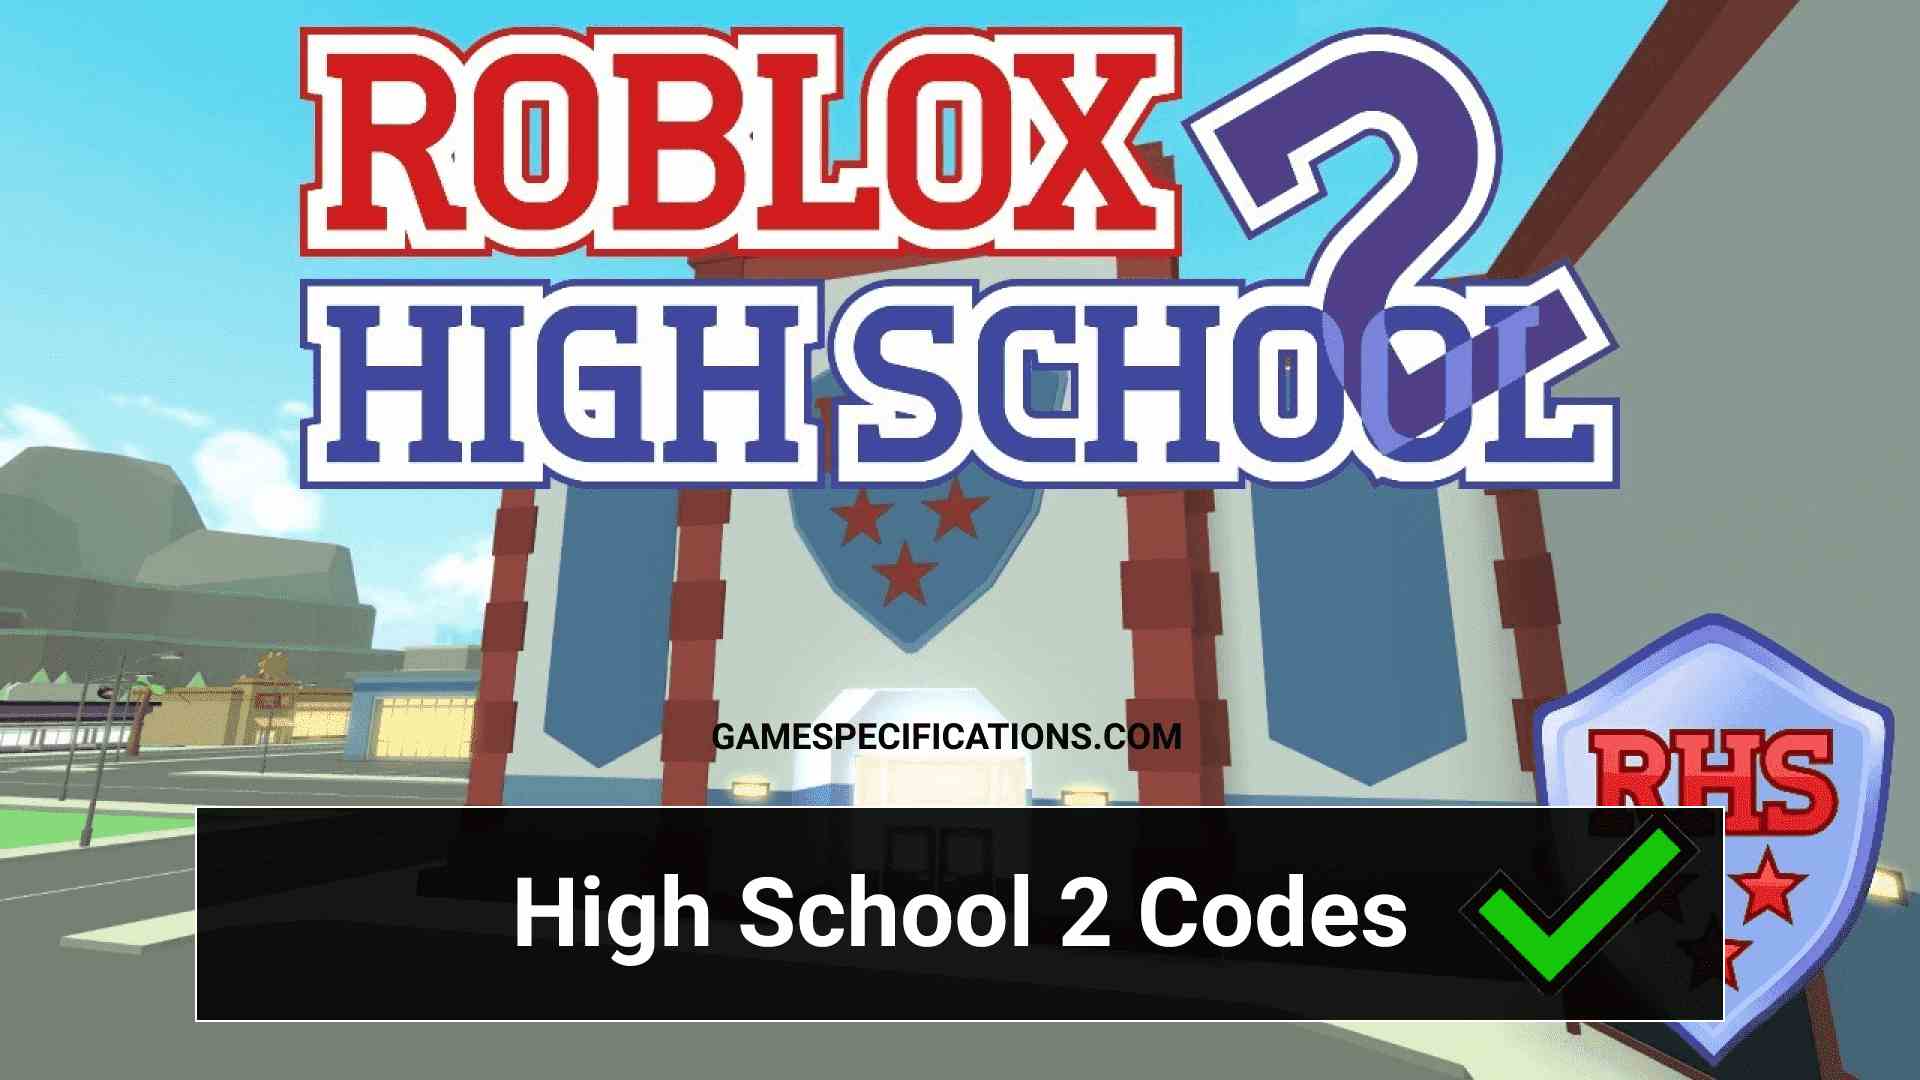 Promo Codes For Roblox High School Life 2020 - roblox high school 2 codes wiki